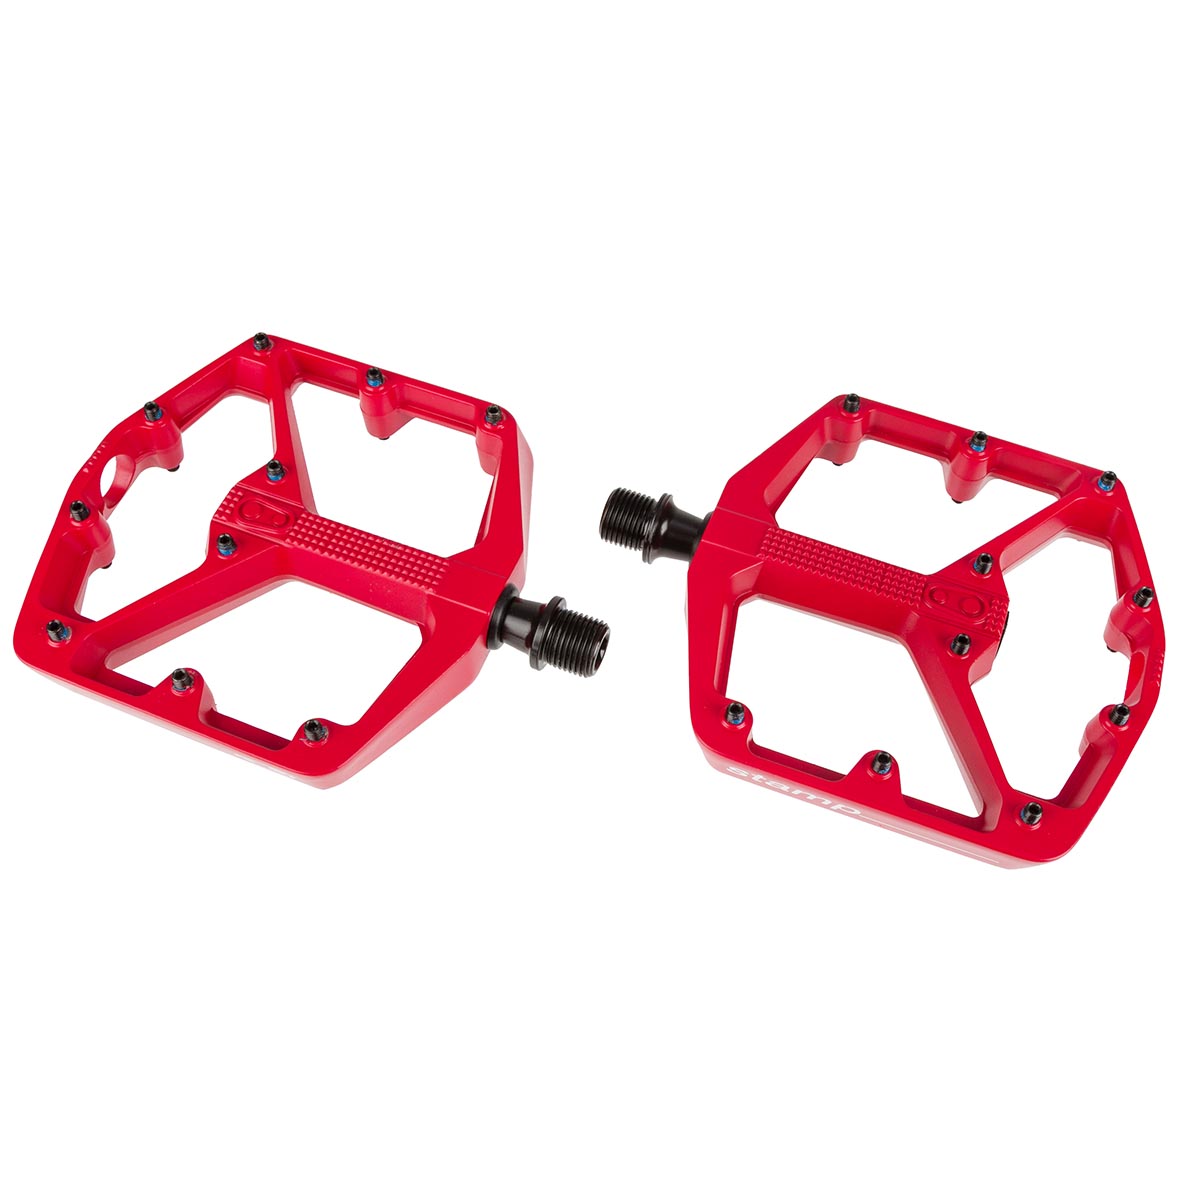 Crankbrothers Pedals Stamp 2 2019 Red, Large